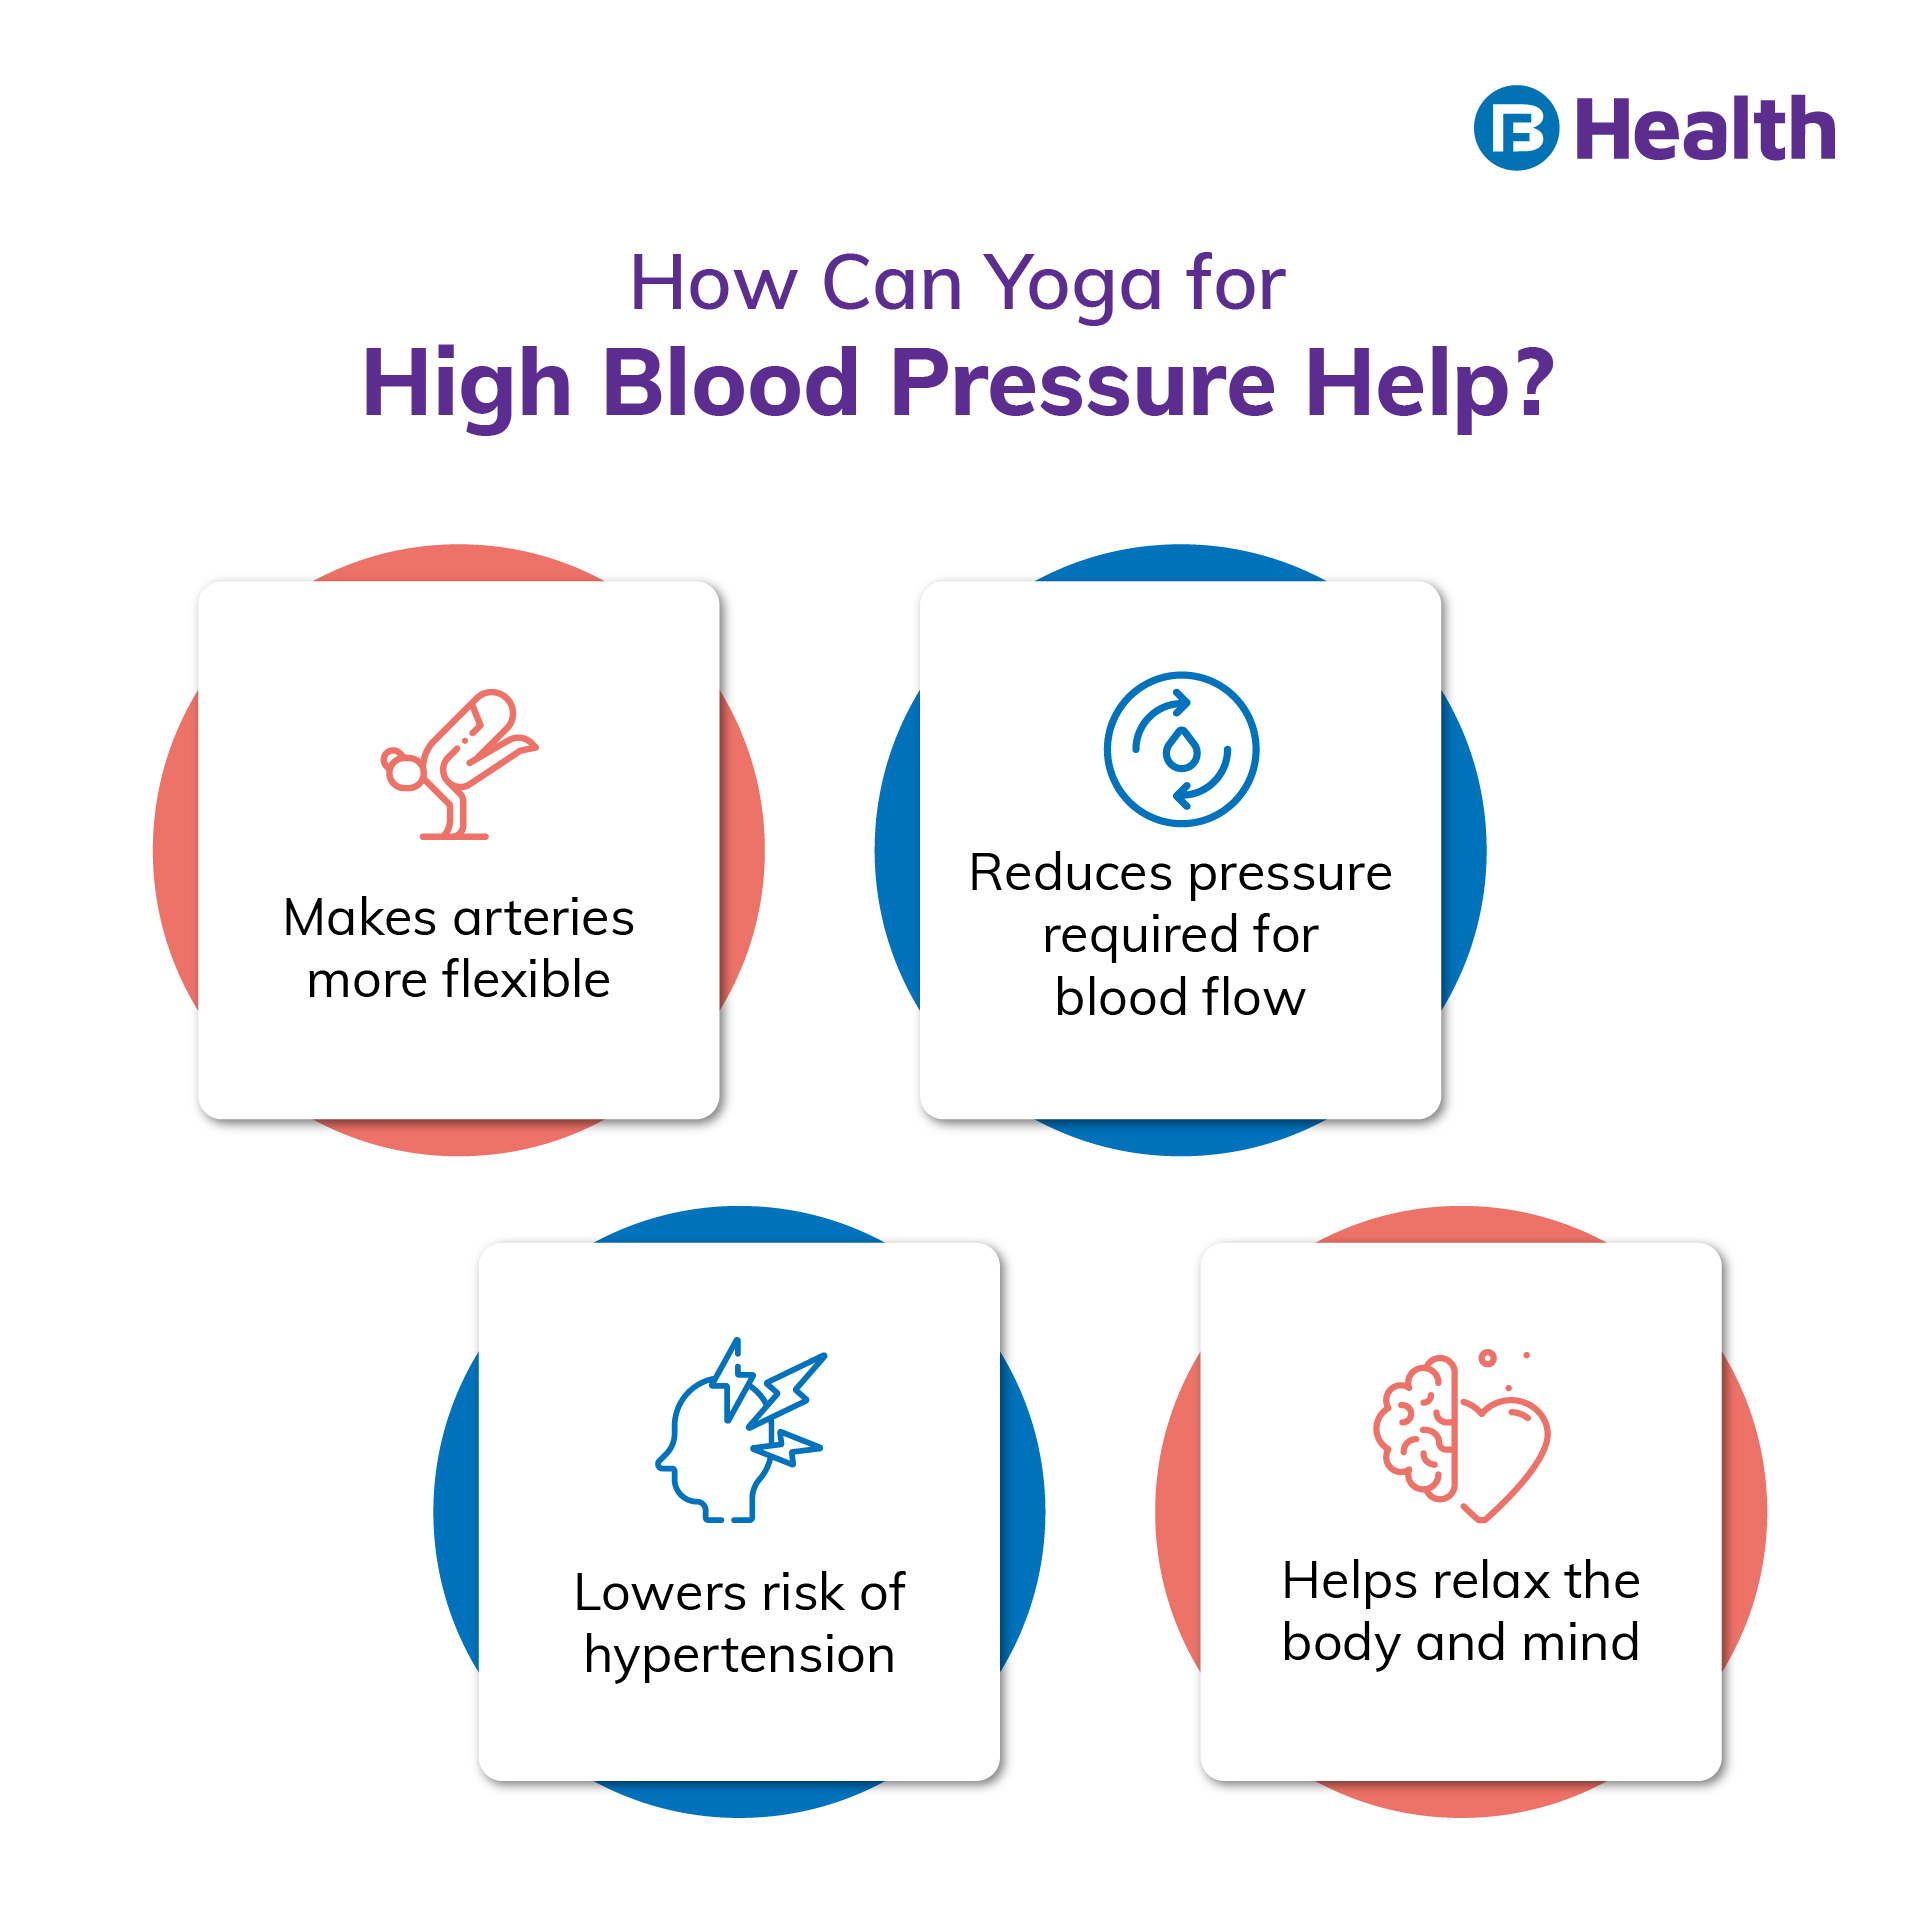  Benefits of Yoga for High Blood Pressure